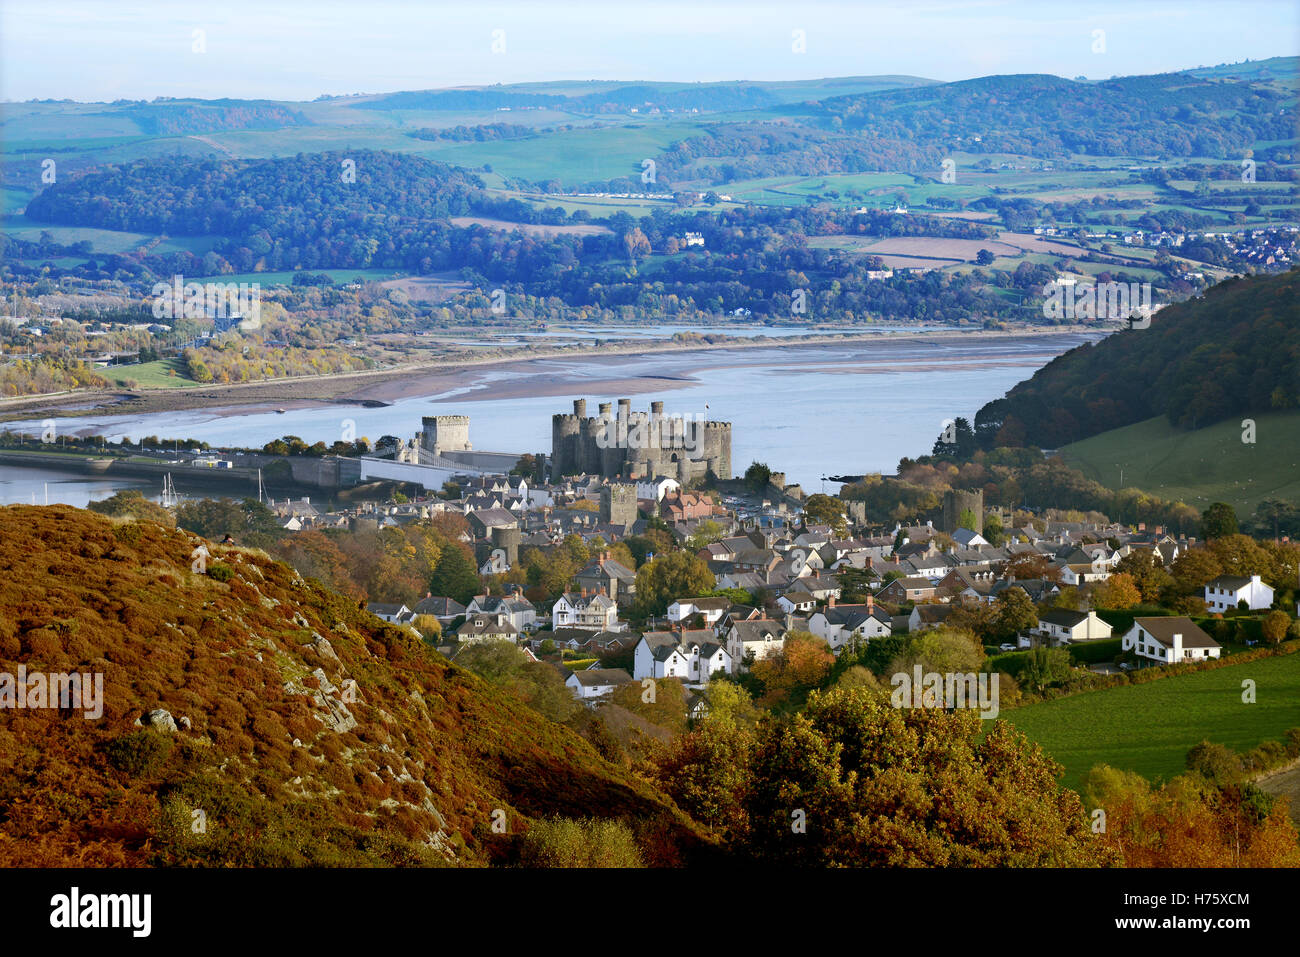 Conwy Castle, surrounded by the town, and nestled by the estuary of the River Conwy in North Wales, Great Britain. Stock Photo